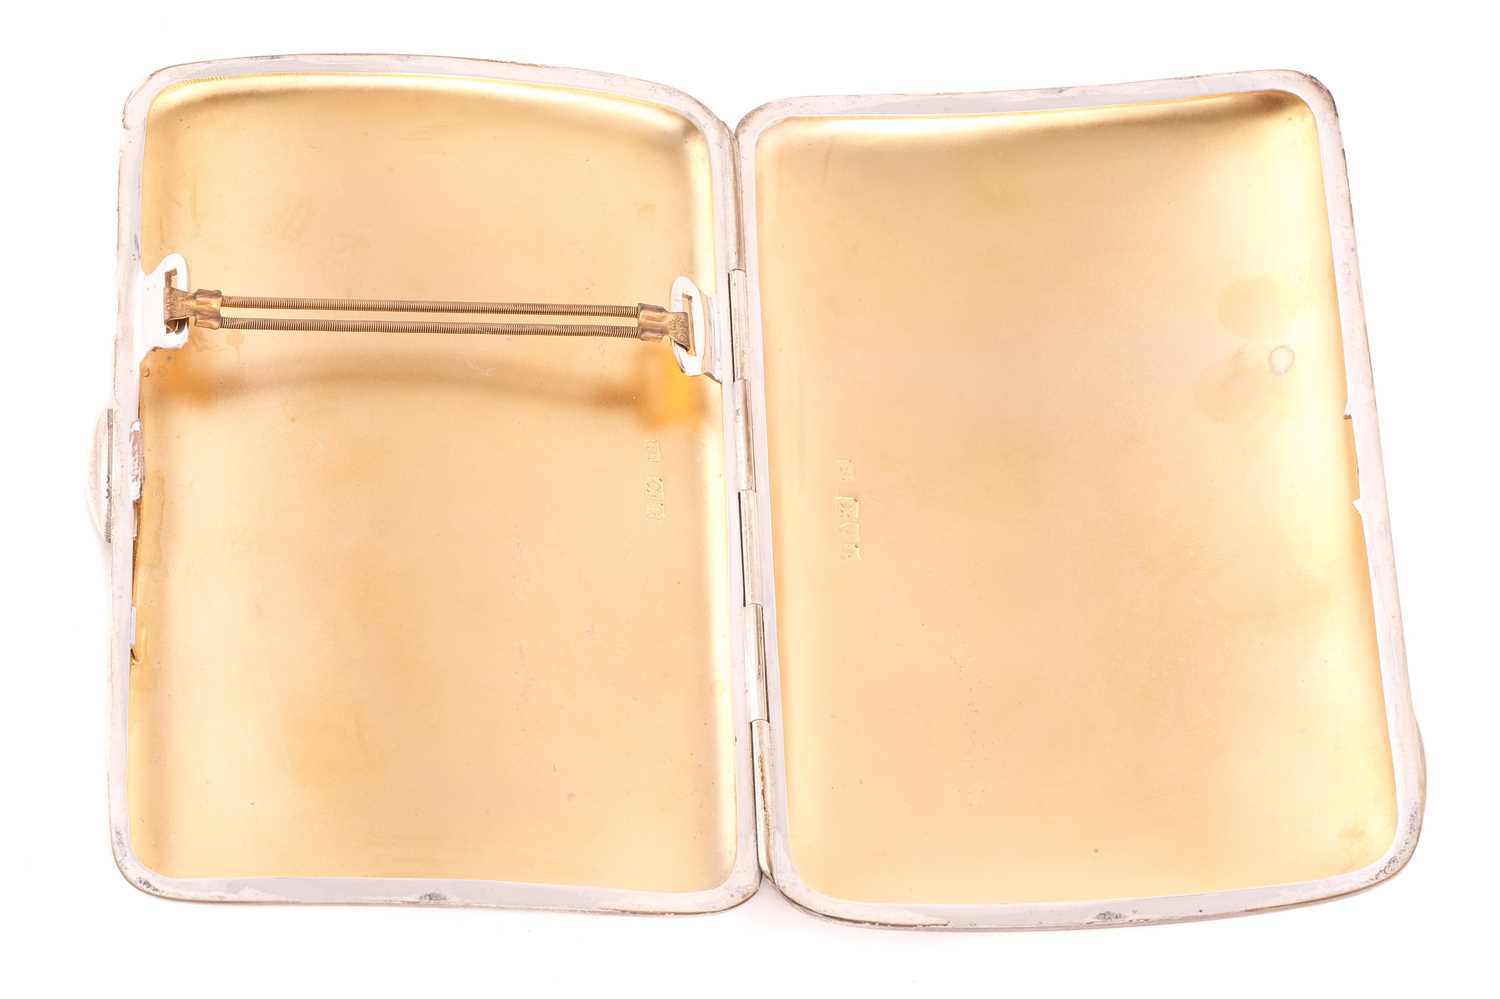 An Edward VII silver cigarette case, Chester 1900 by Colen Hewer Cheshire, with a gold-coloured - Image 7 of 9